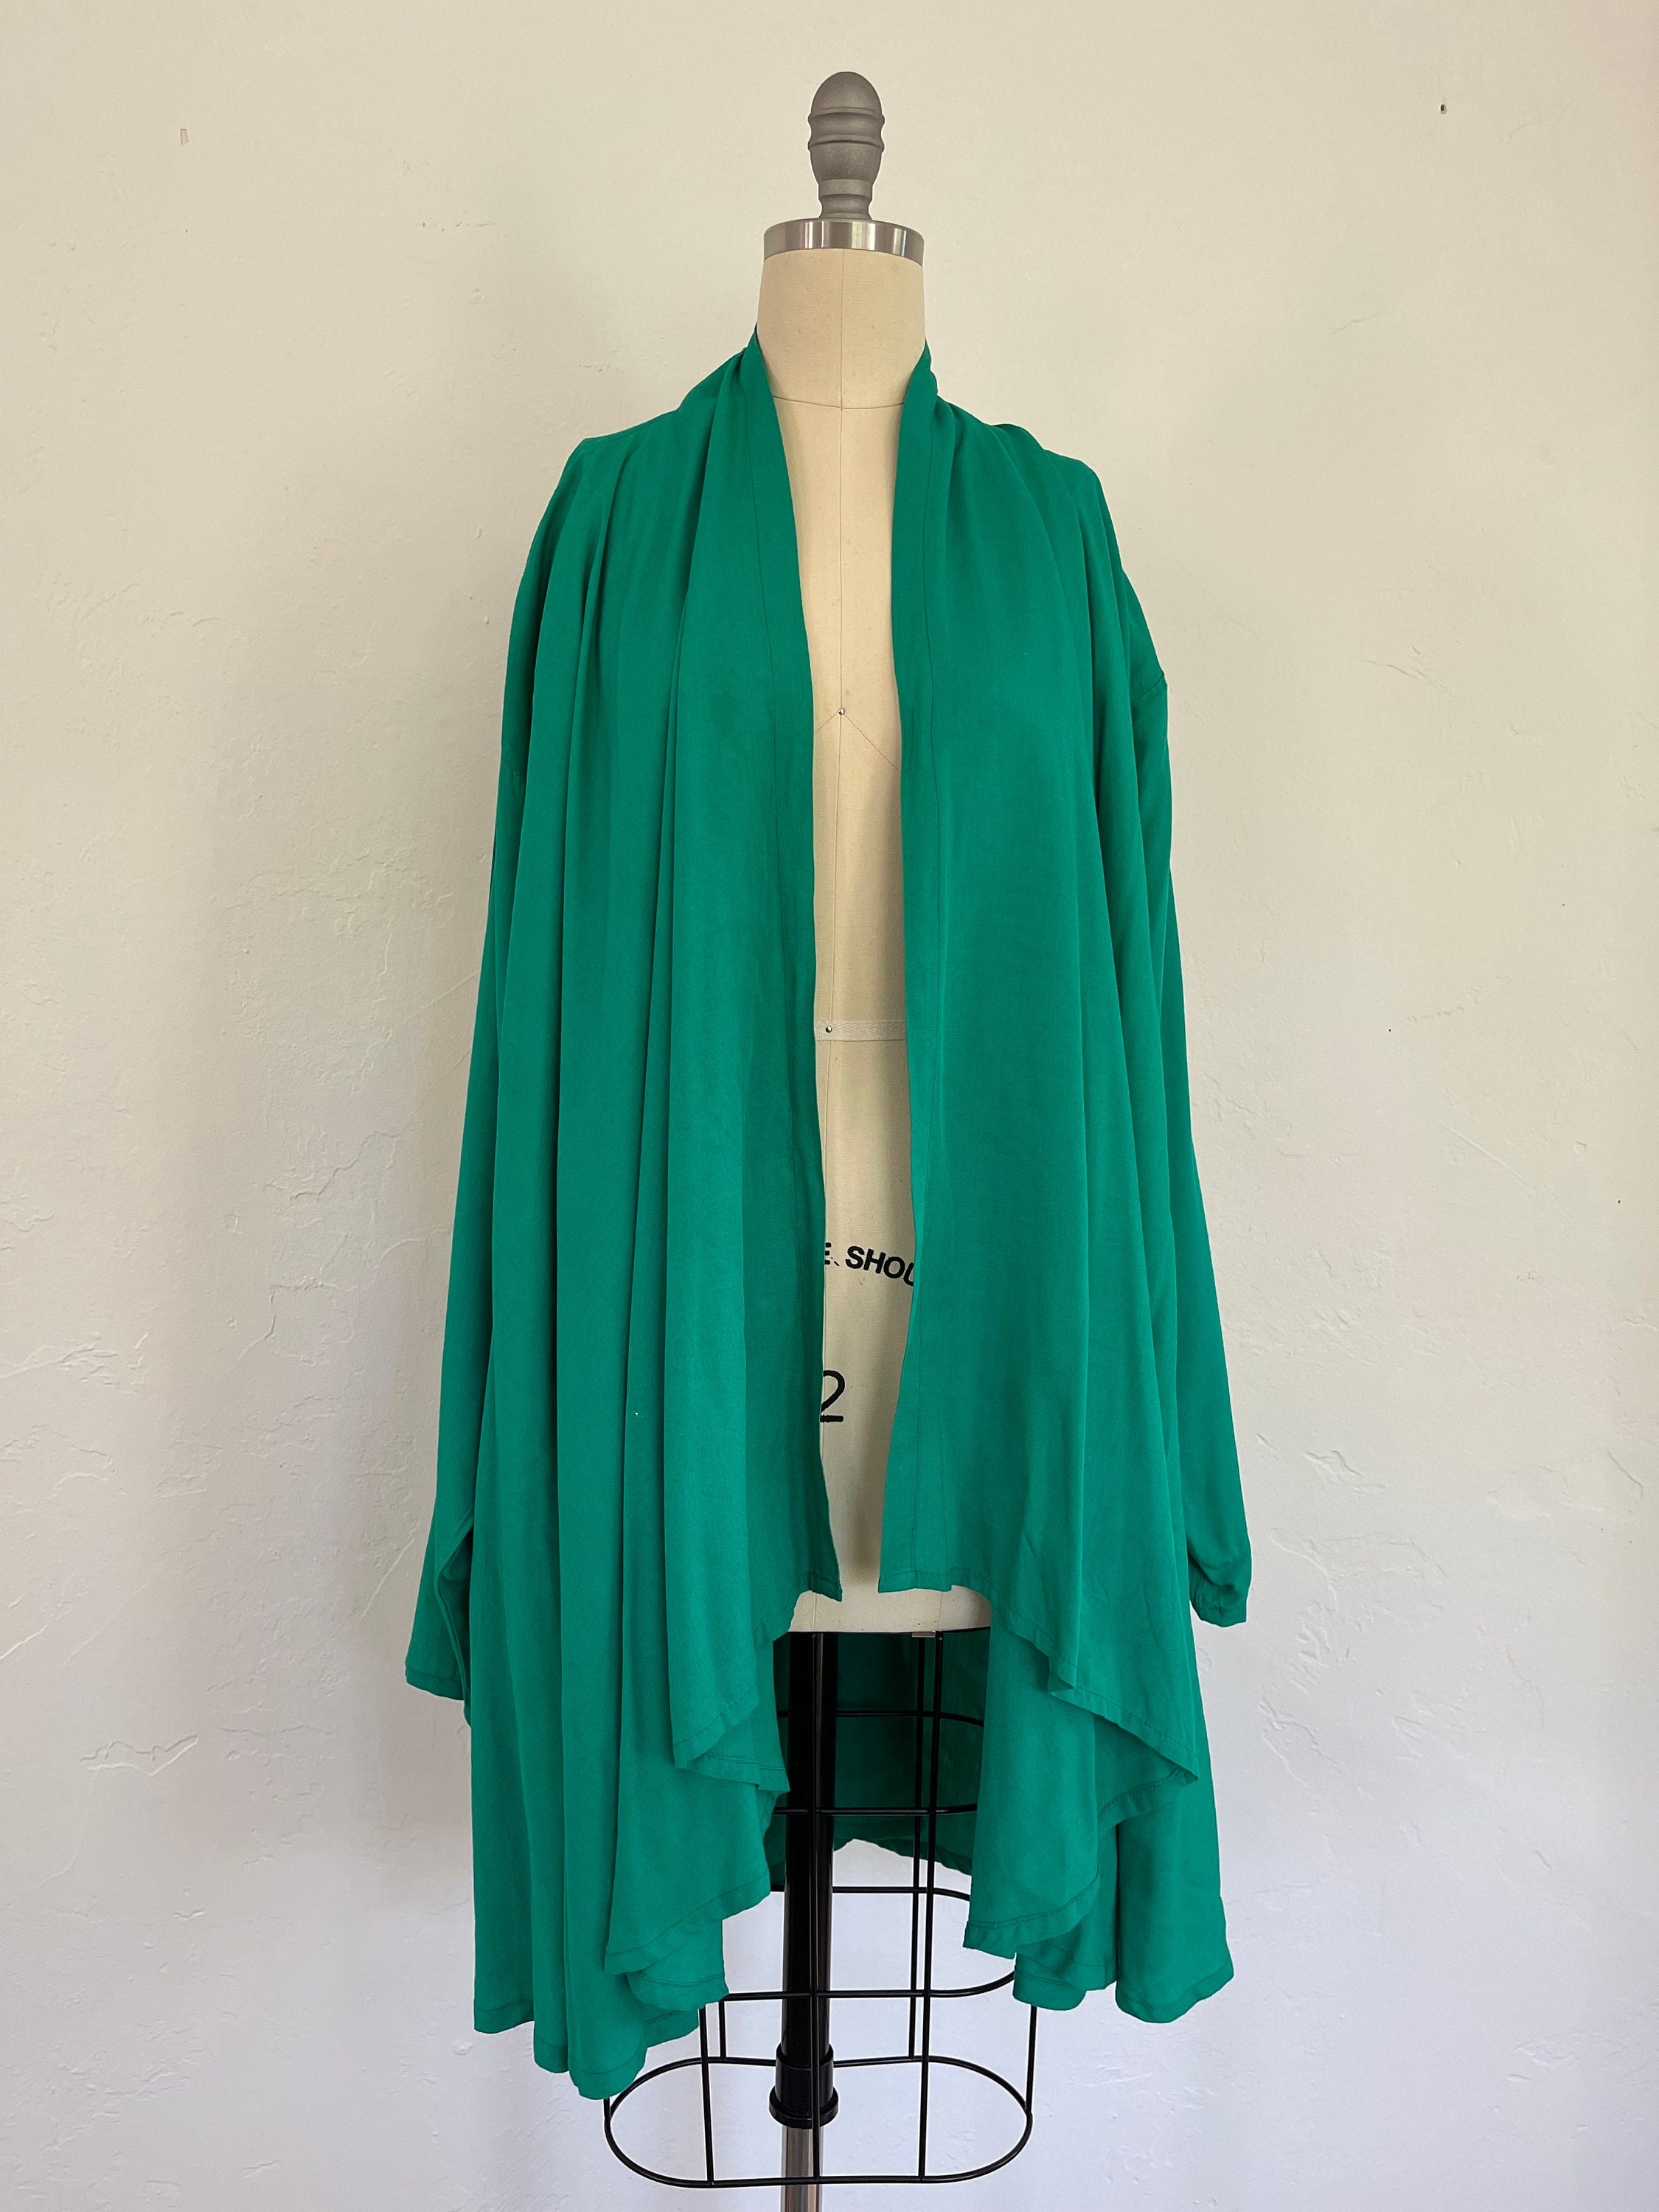 Vintage green Gypsy by Pier 1 batwing kimono style cocoon | Etsy